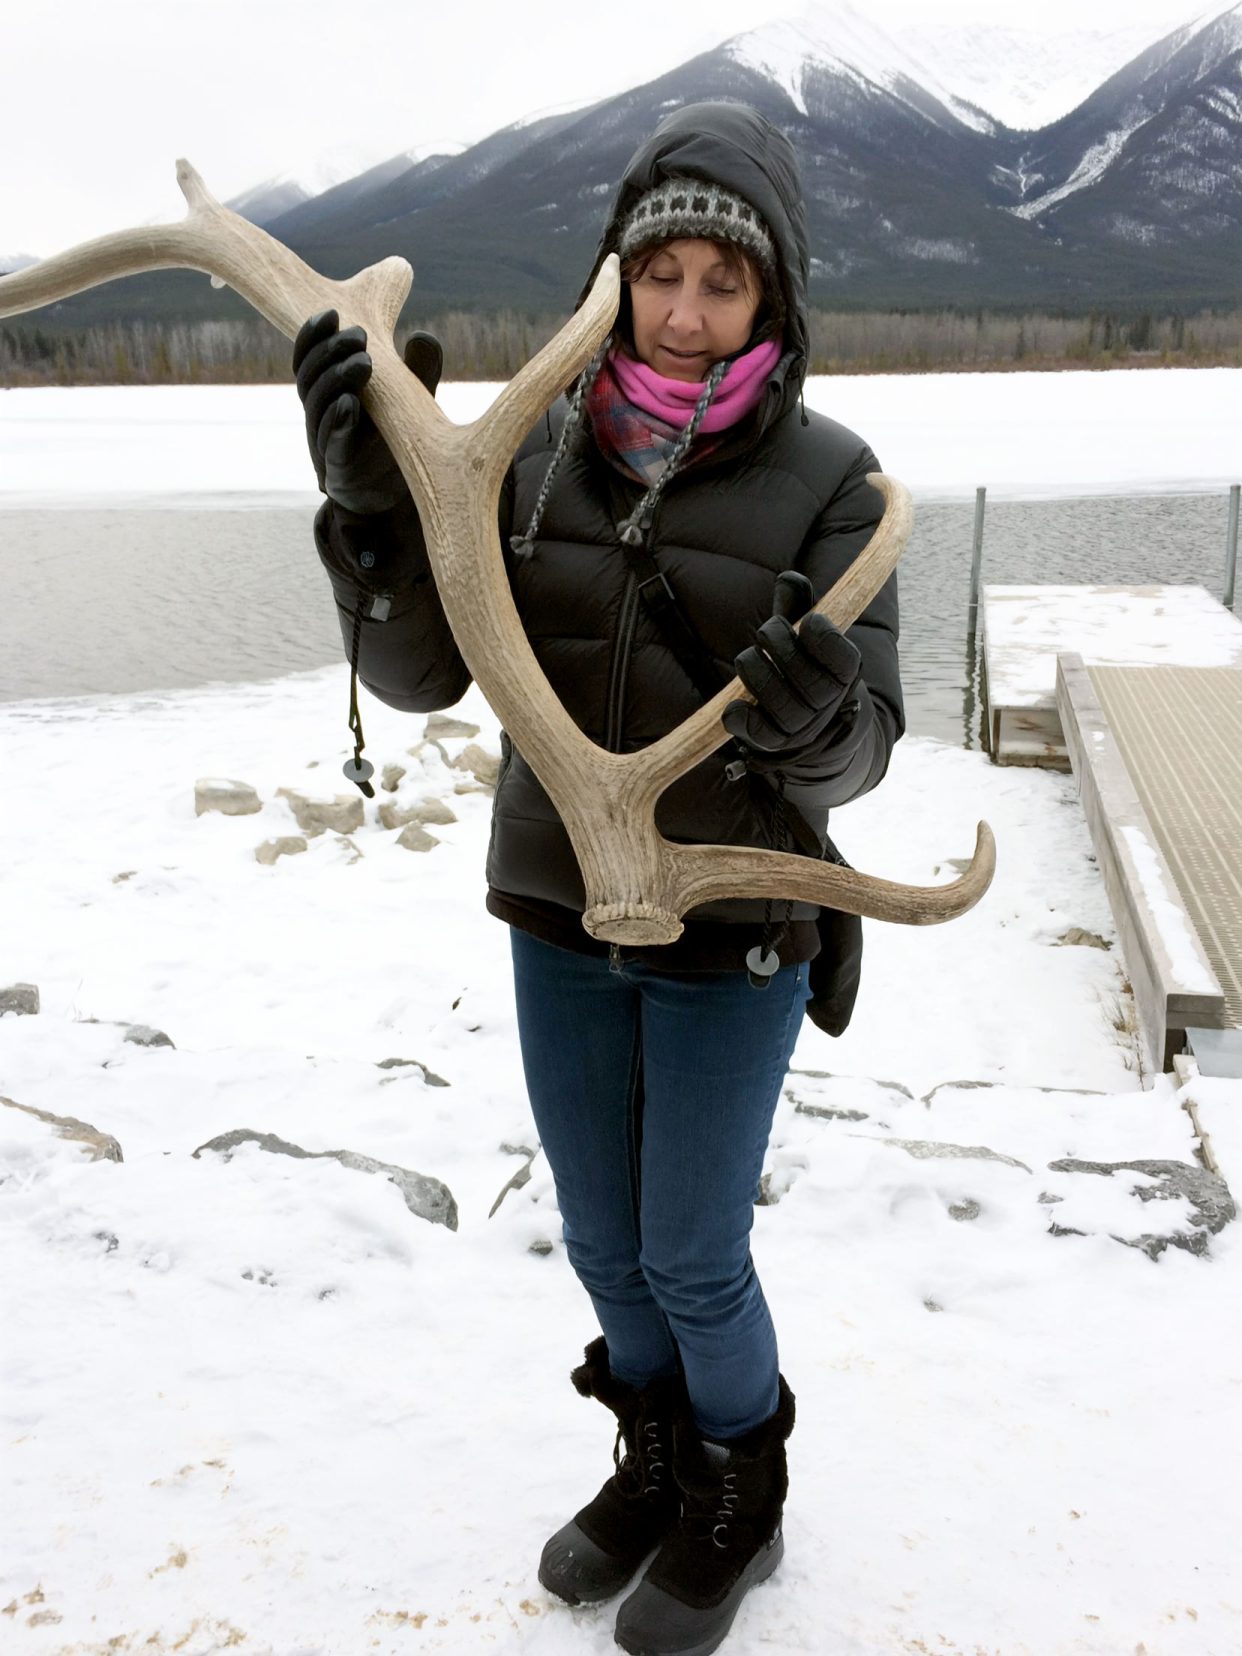 Shelley holding an elk antler on the Winter wildlife tour in Banff